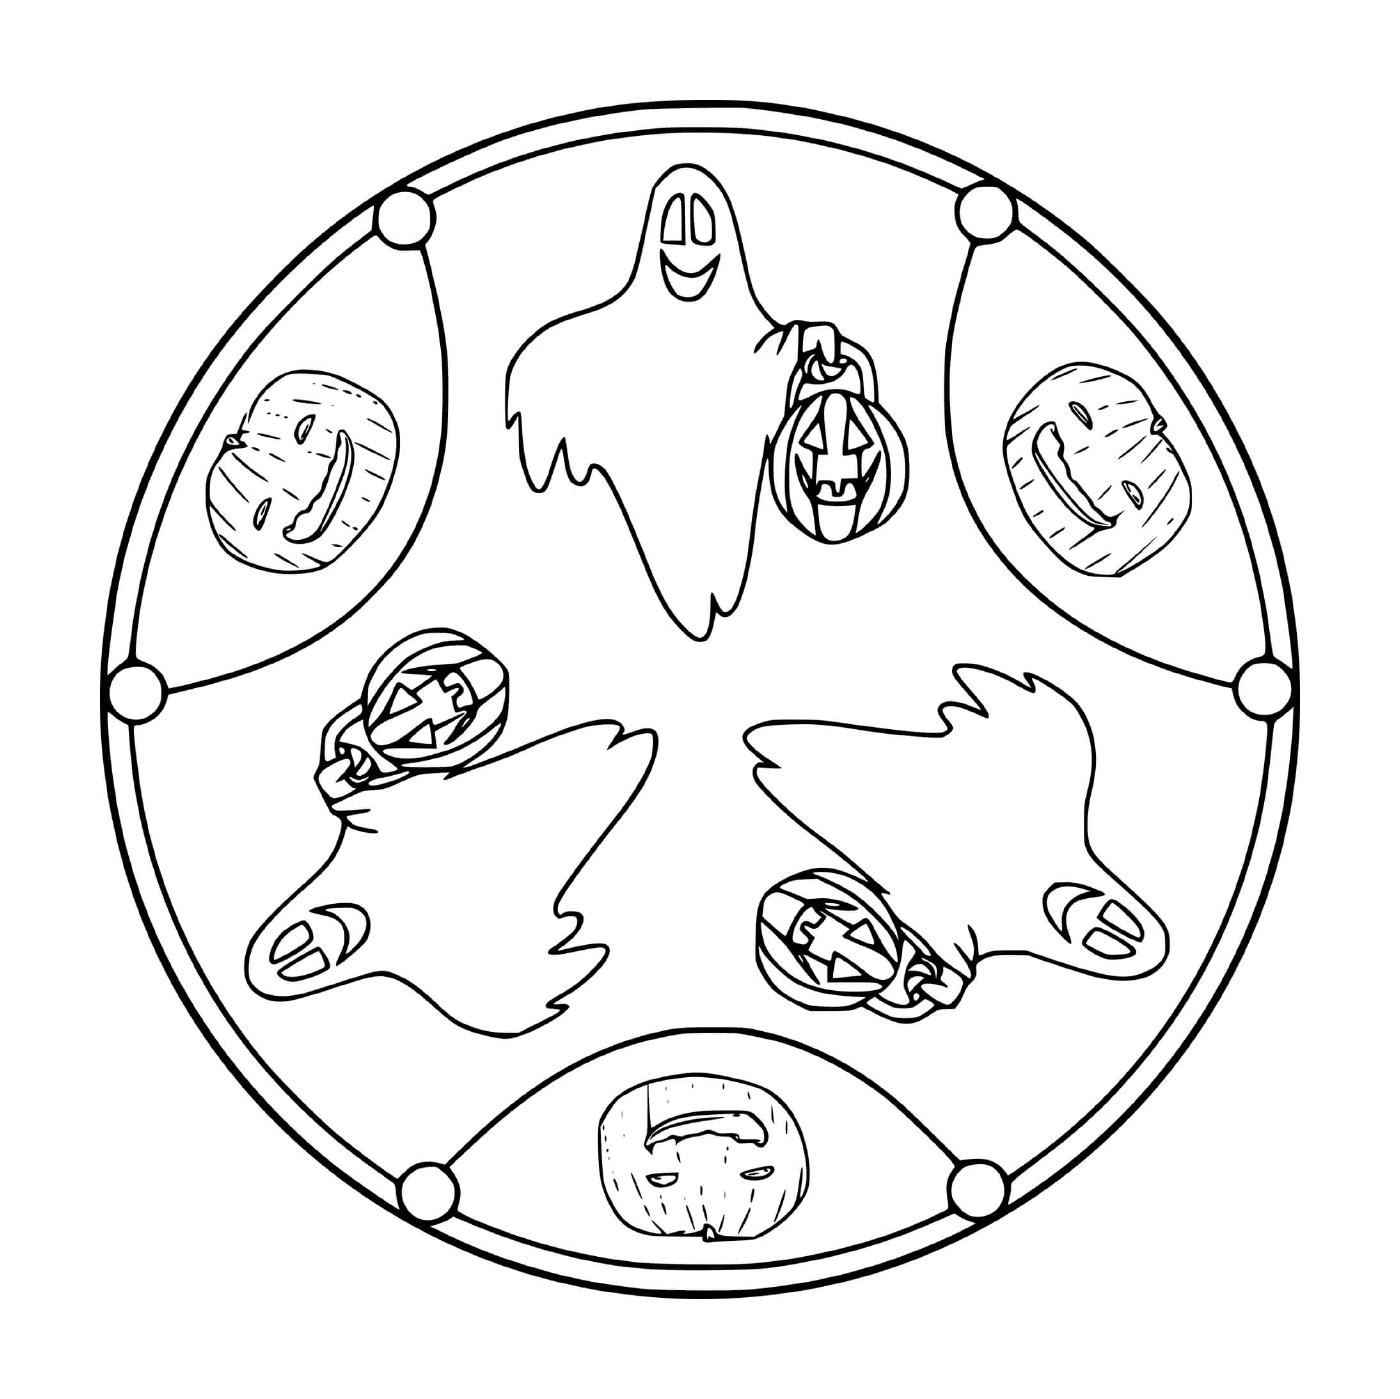  Circle with drawn faces 